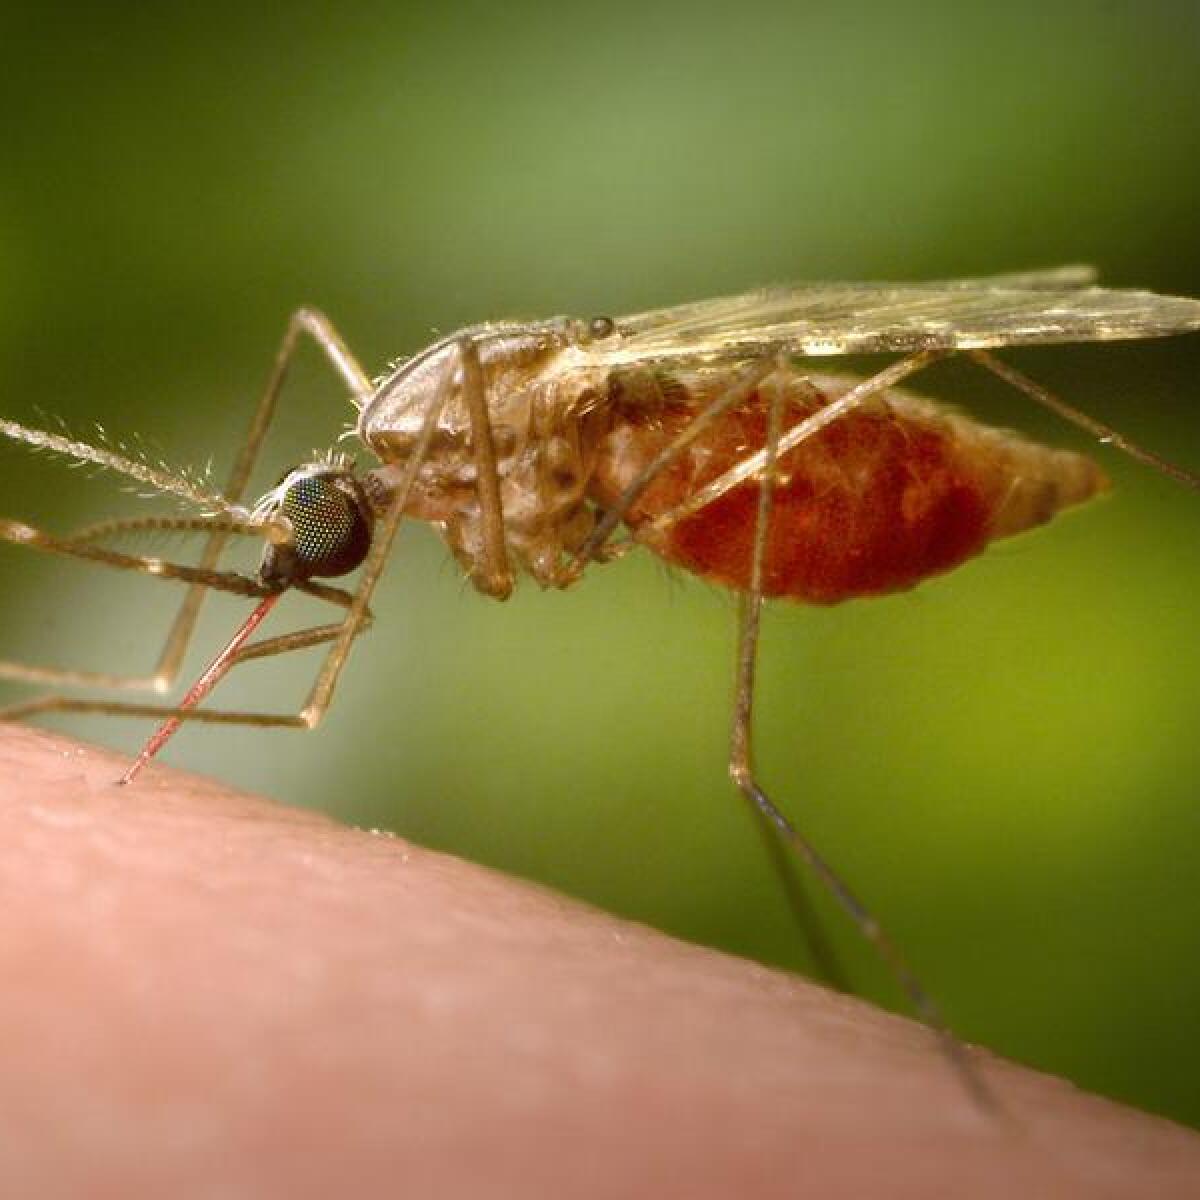 A malarial mosquito.